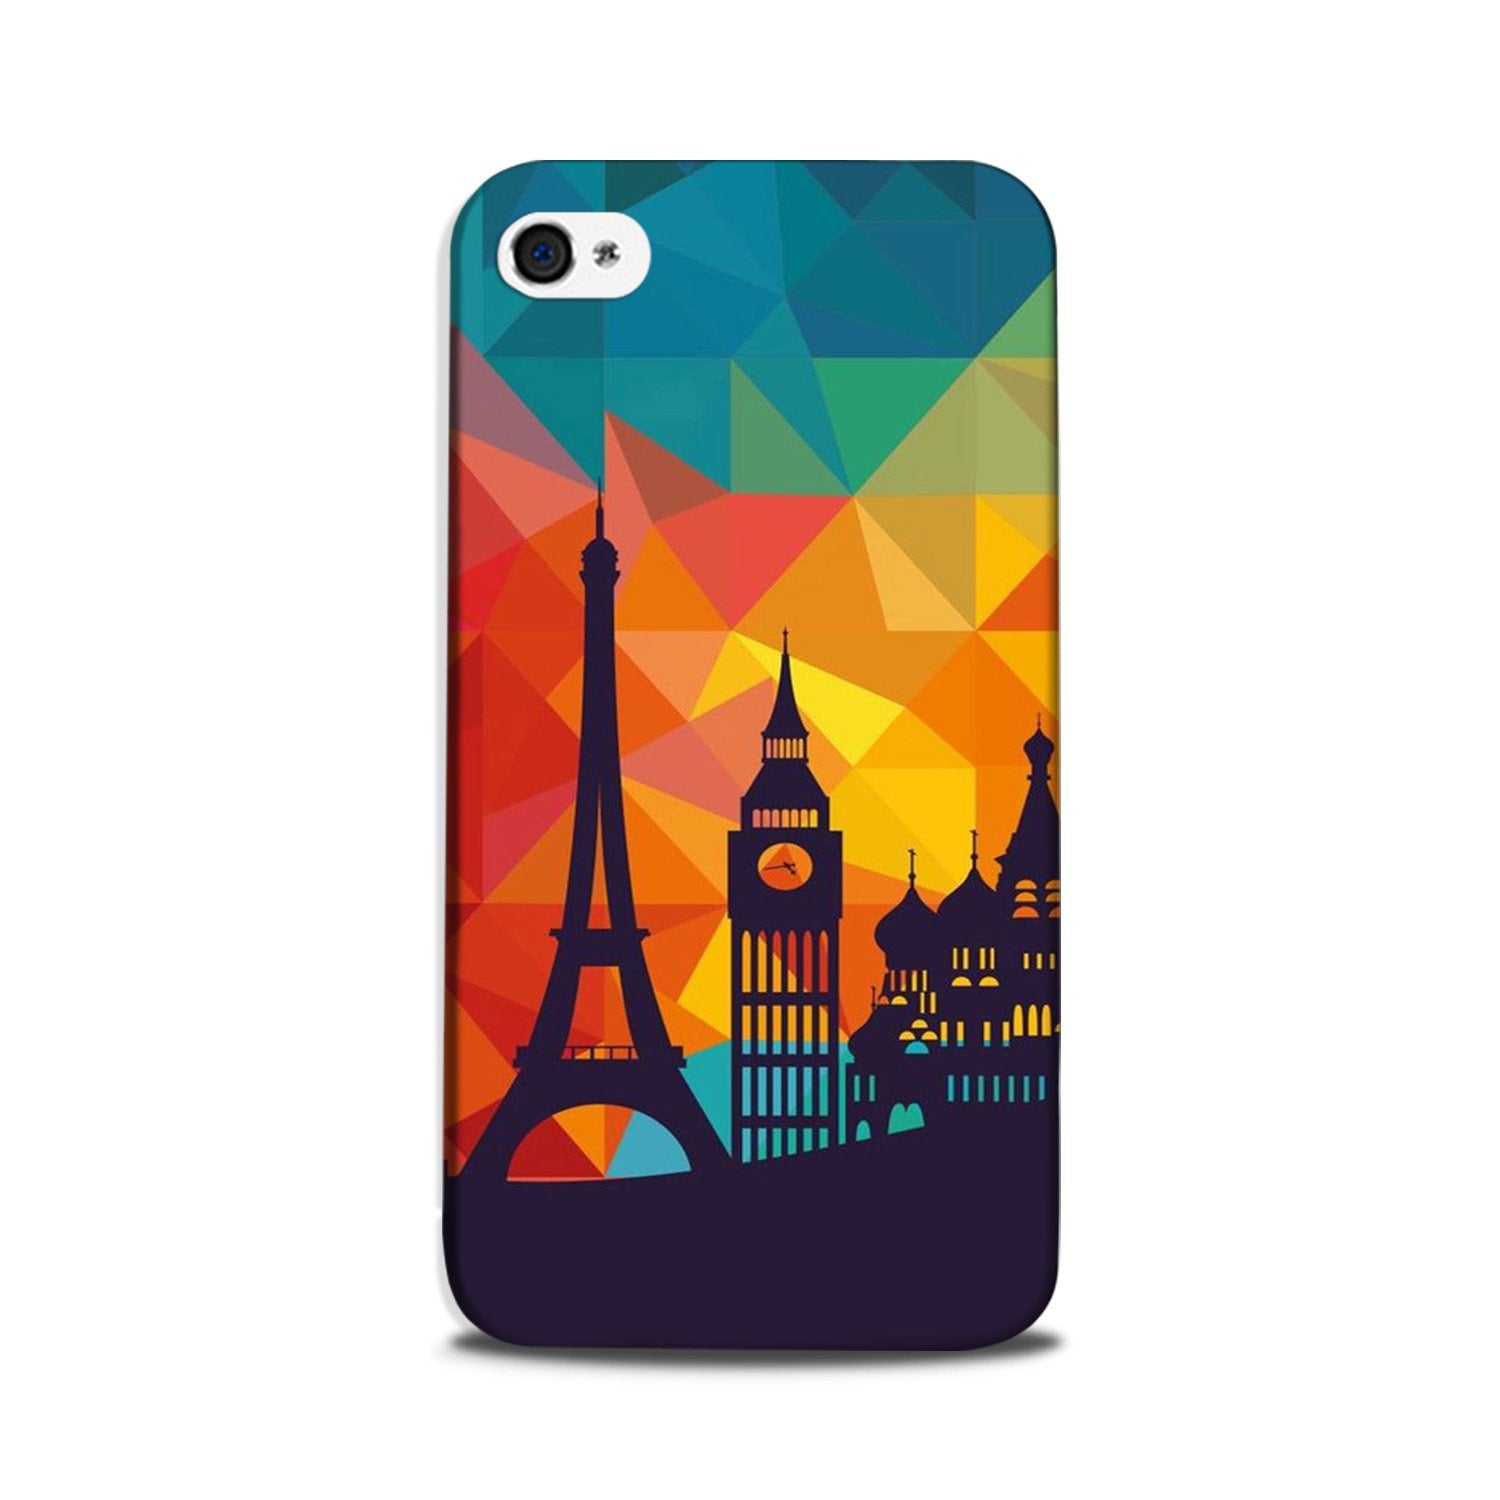 Eiffel Tower2 Case for iPhone 5/ 5s